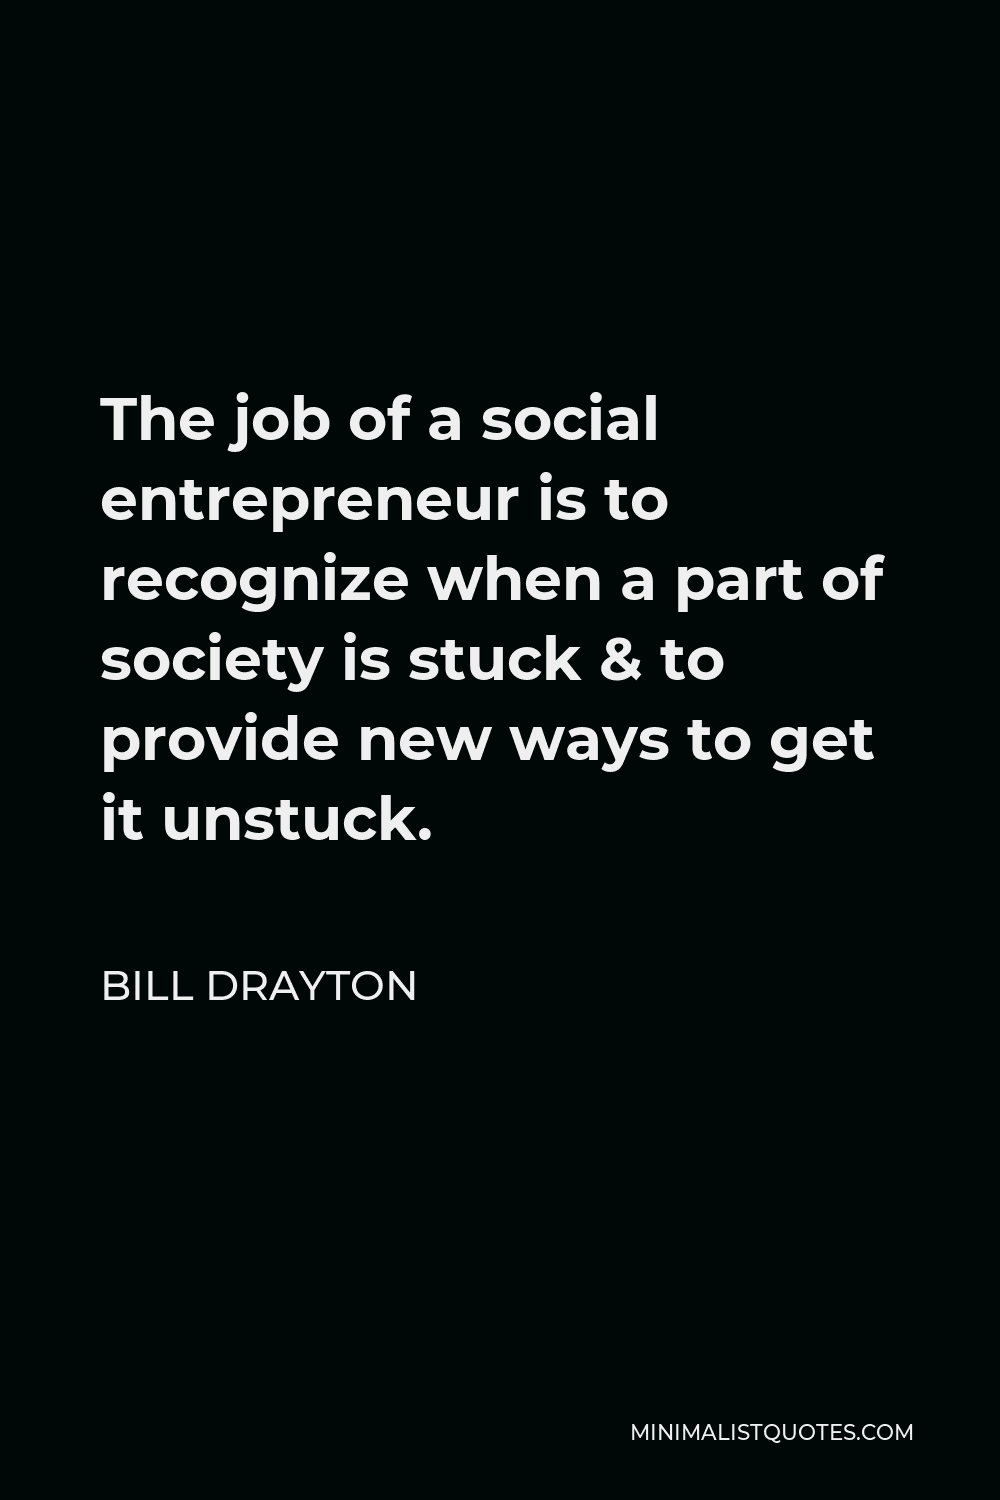 Bill Drayton Quote - The job of a social entrepreneur is to recognize when a part of society is stuck & to provide new ways to get it unstuck.